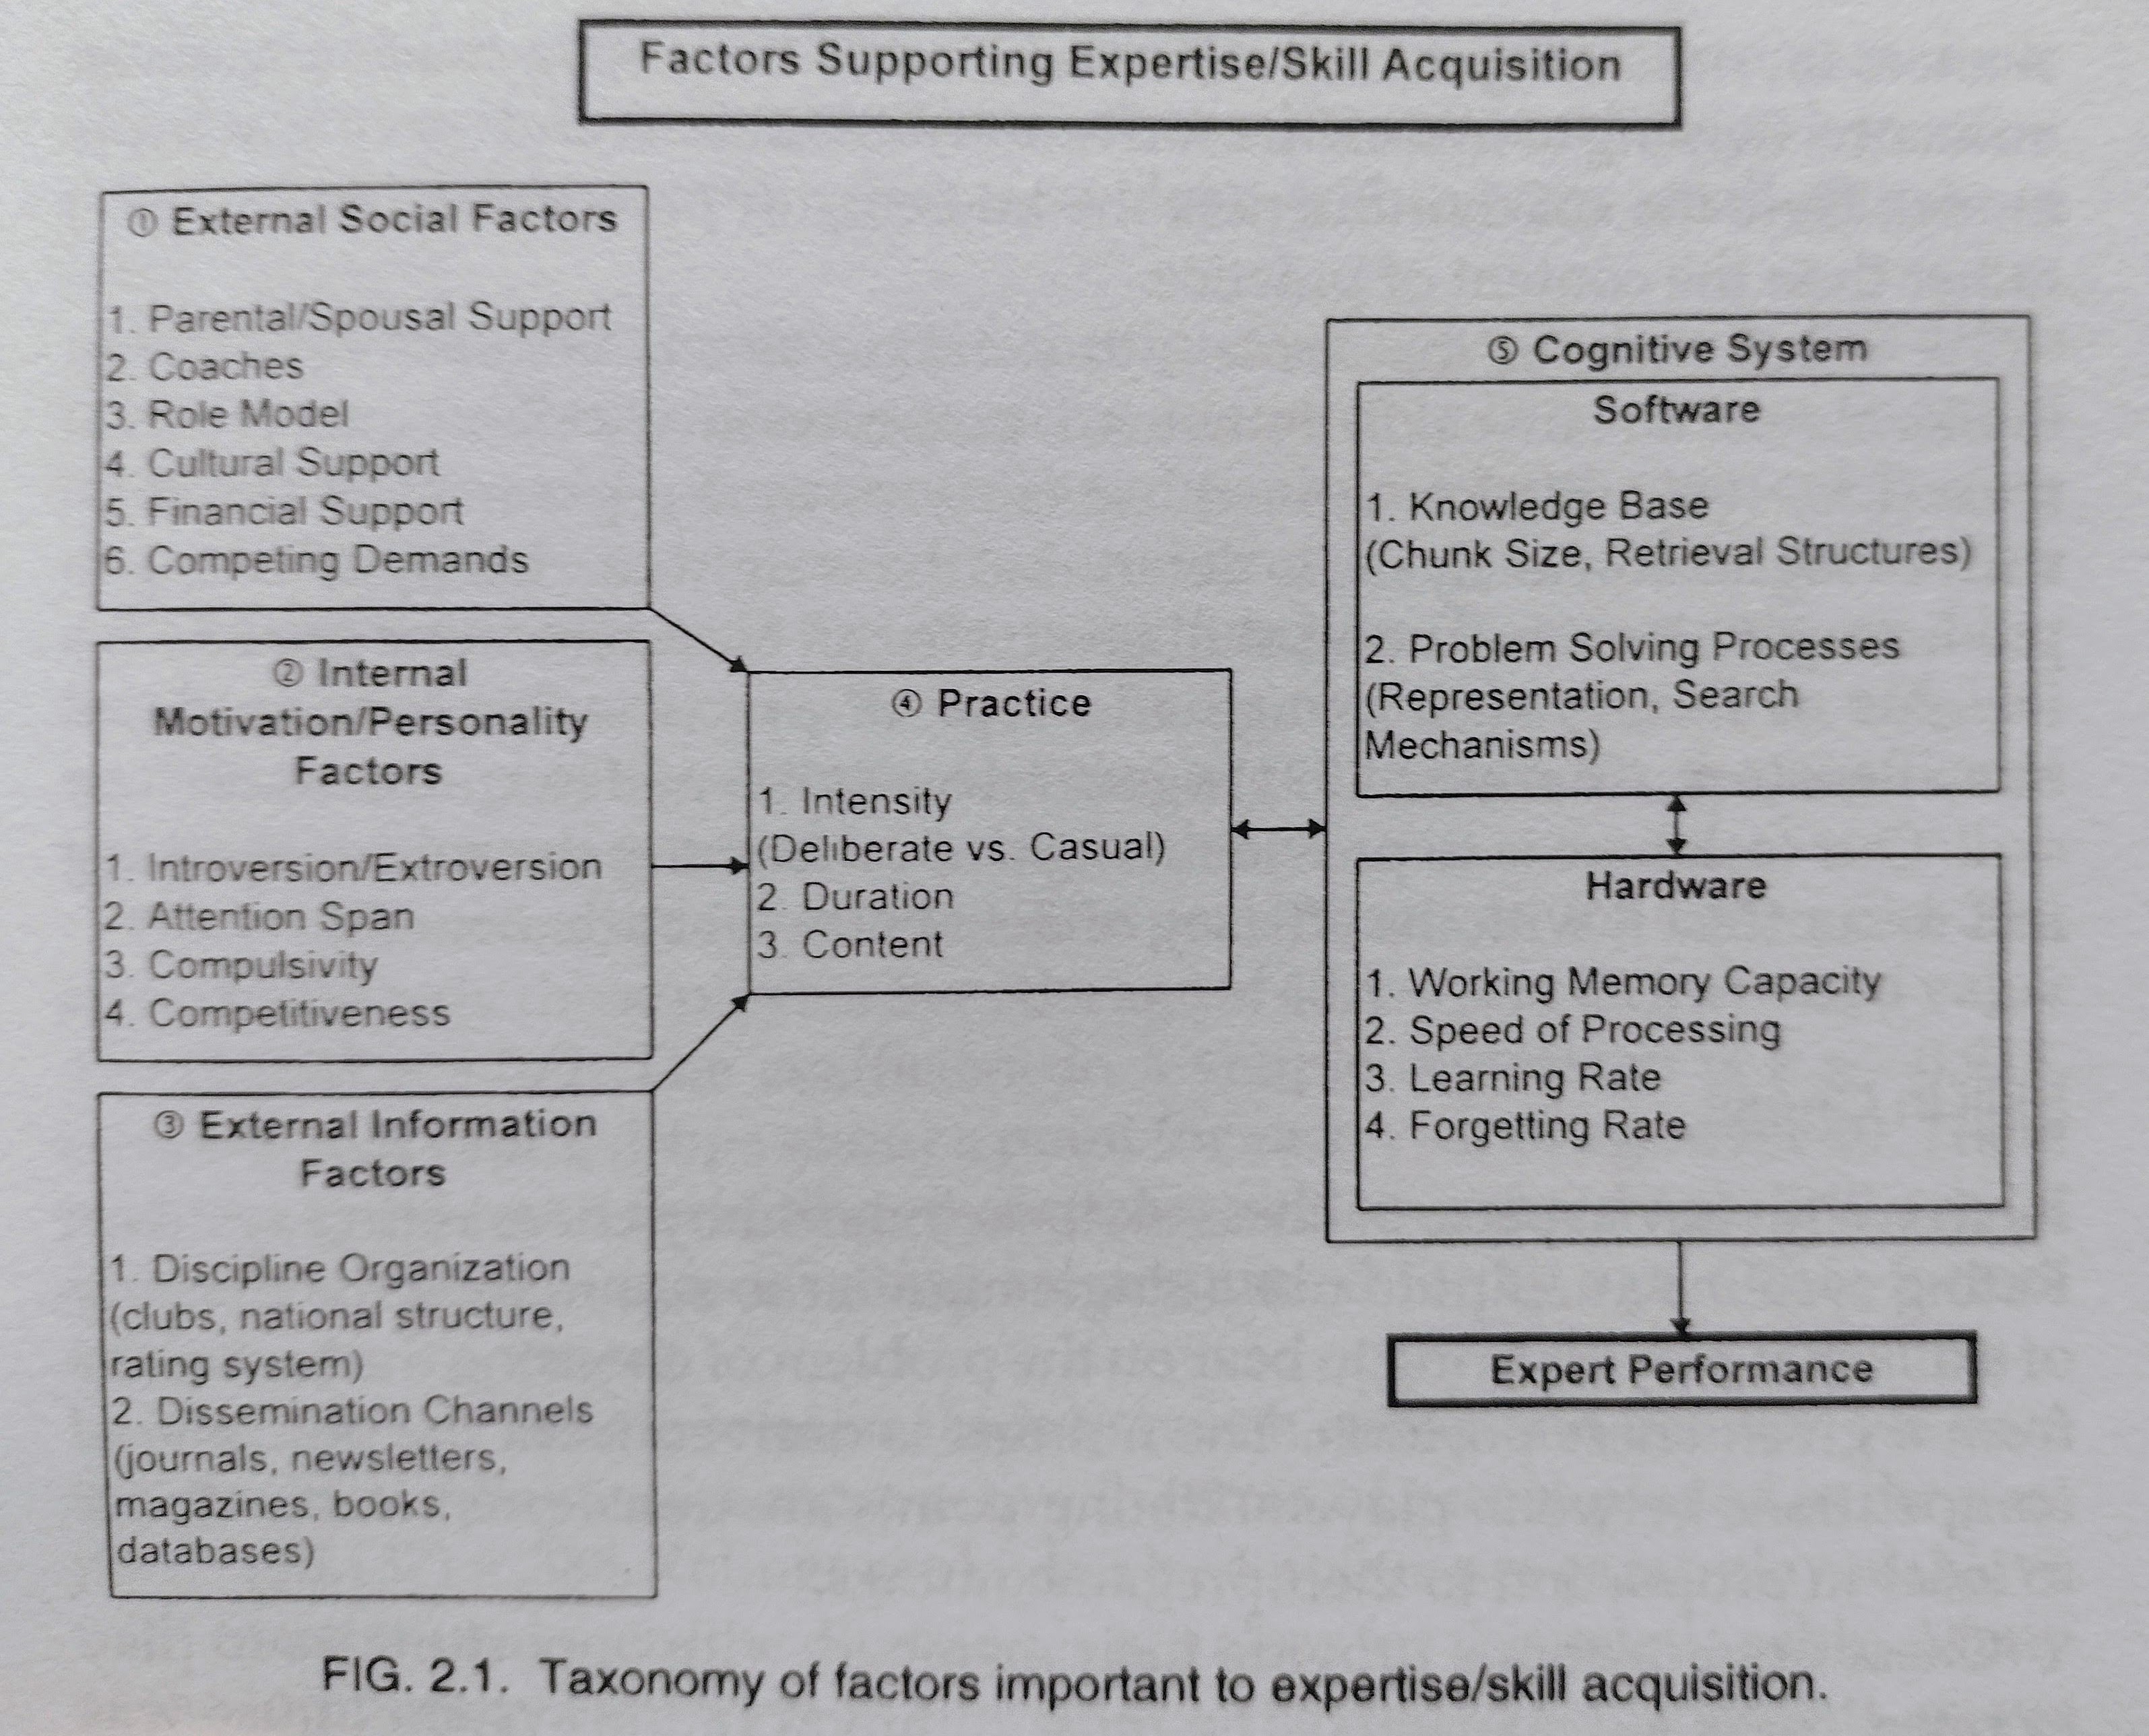 factors supporting expertise/skill acquisition